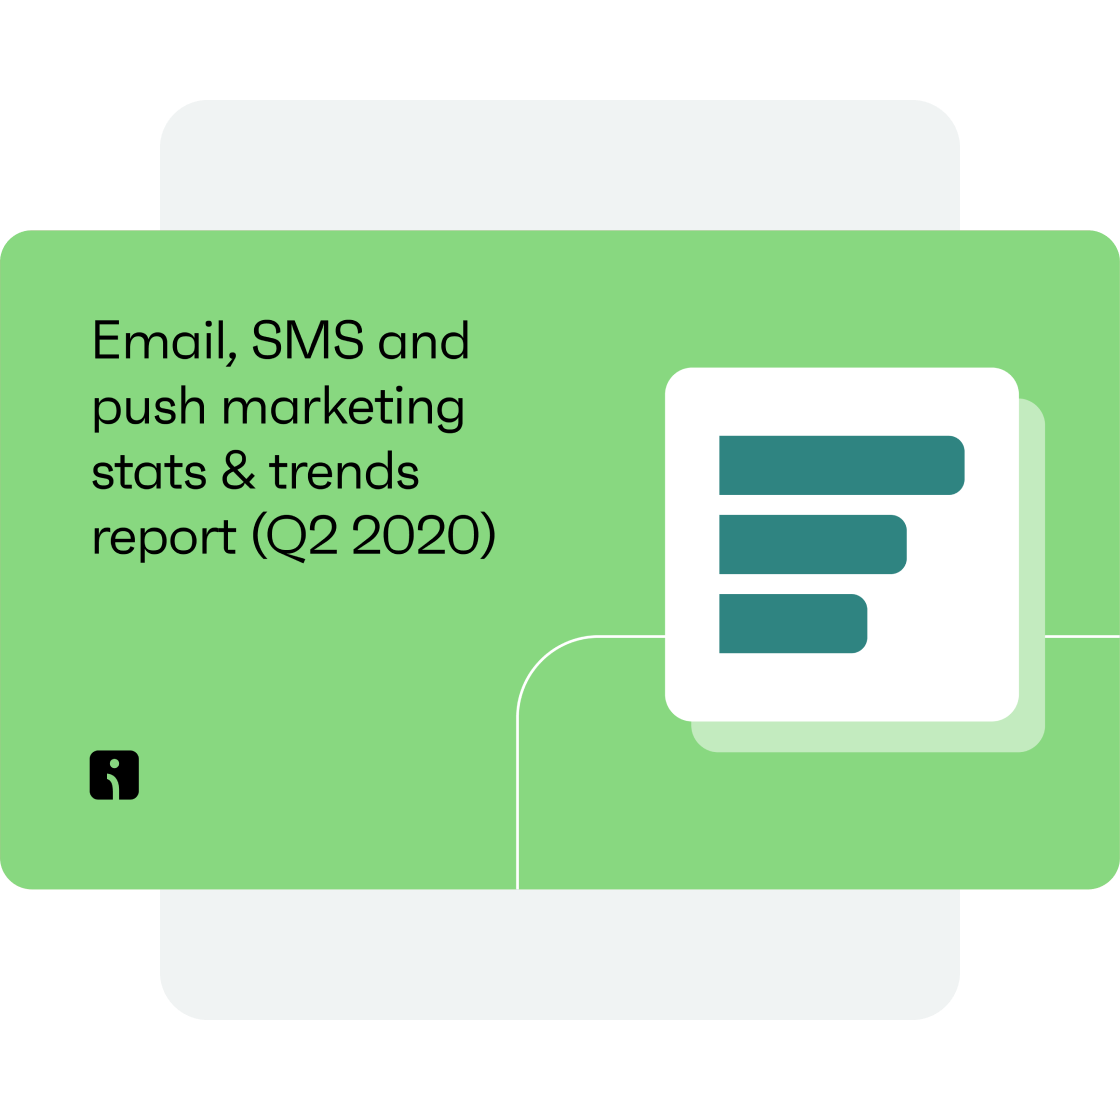 Email & SMS marketing stats & trends report (Q2 2020)